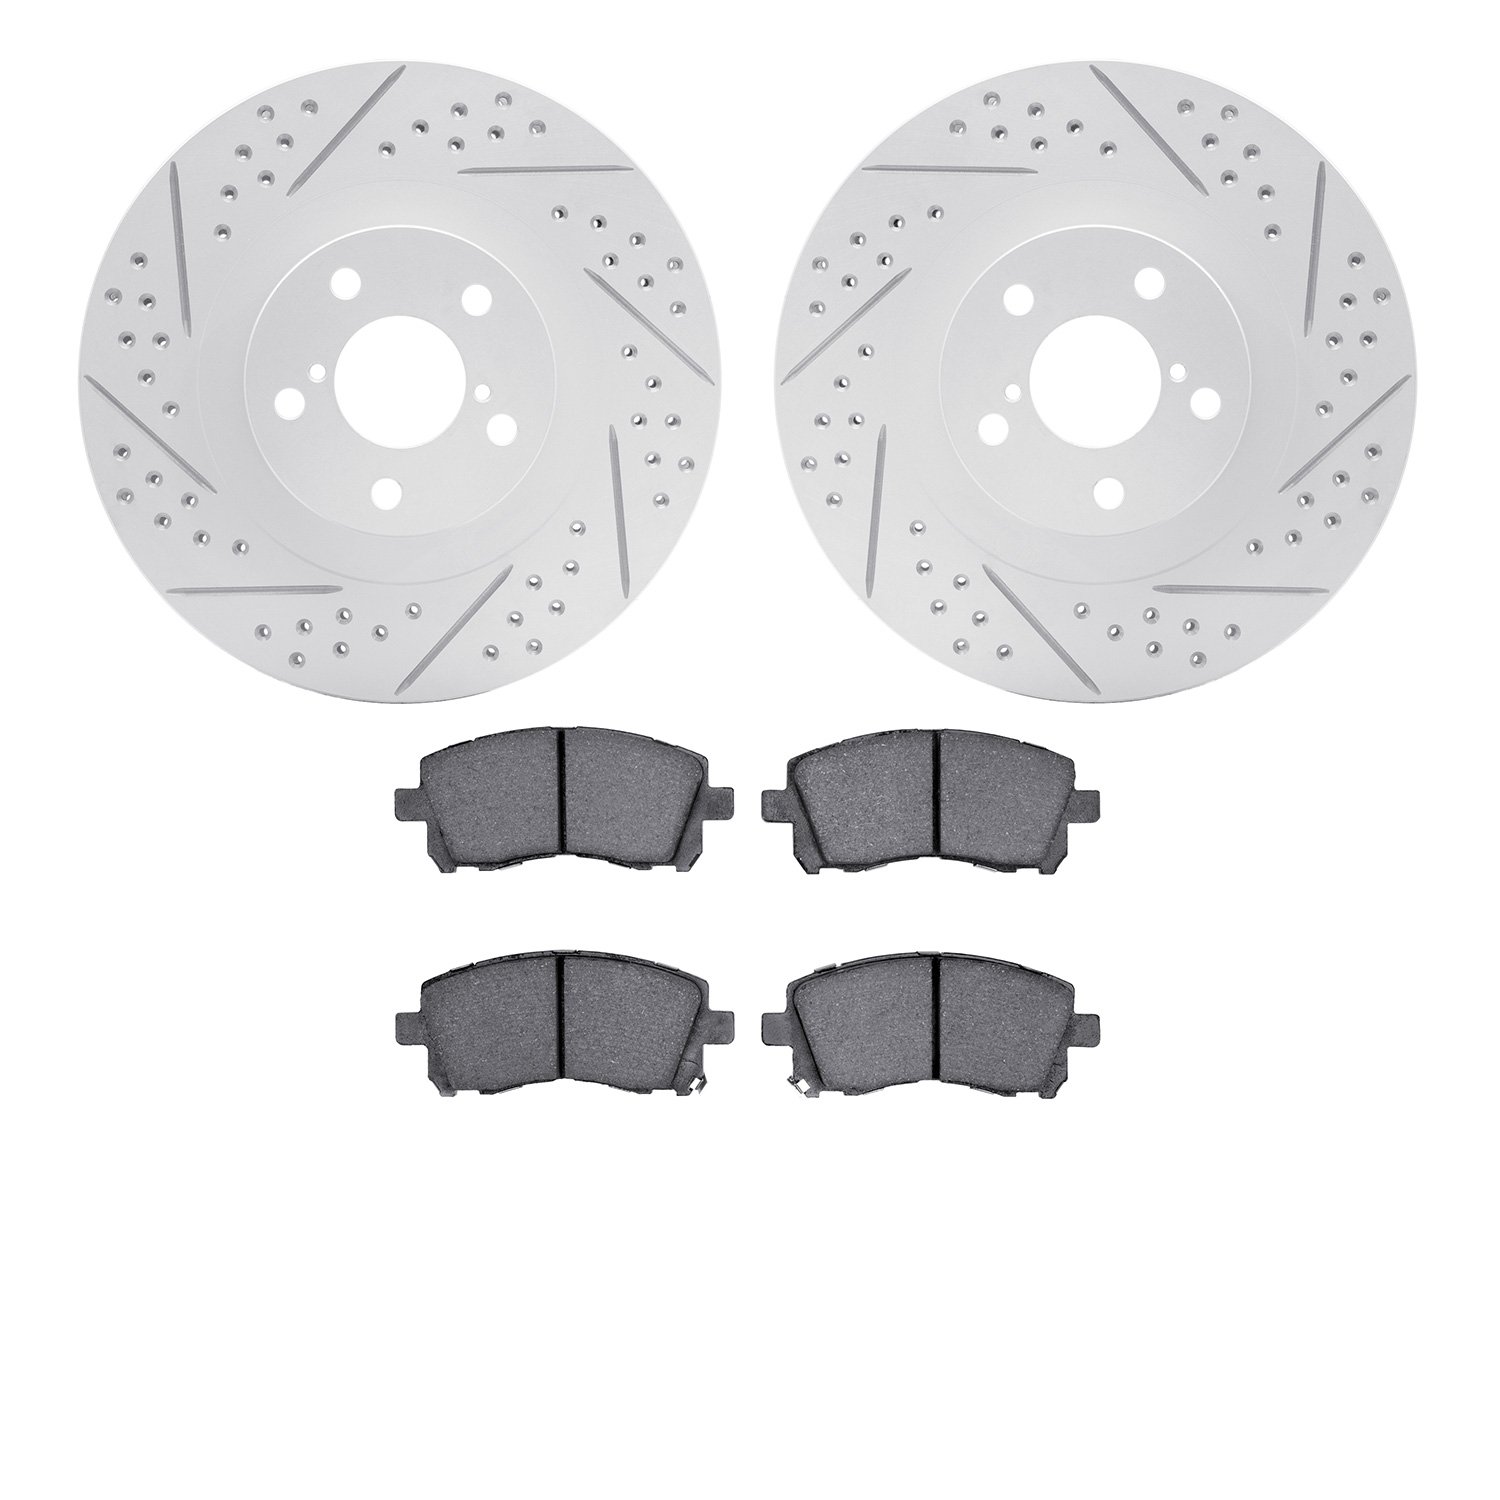 2502-13029 Geoperformance Drilled/Slotted Rotors w/5000 Advanced Brake Pads Kit, 2001-2003 Subaru, Position: Front